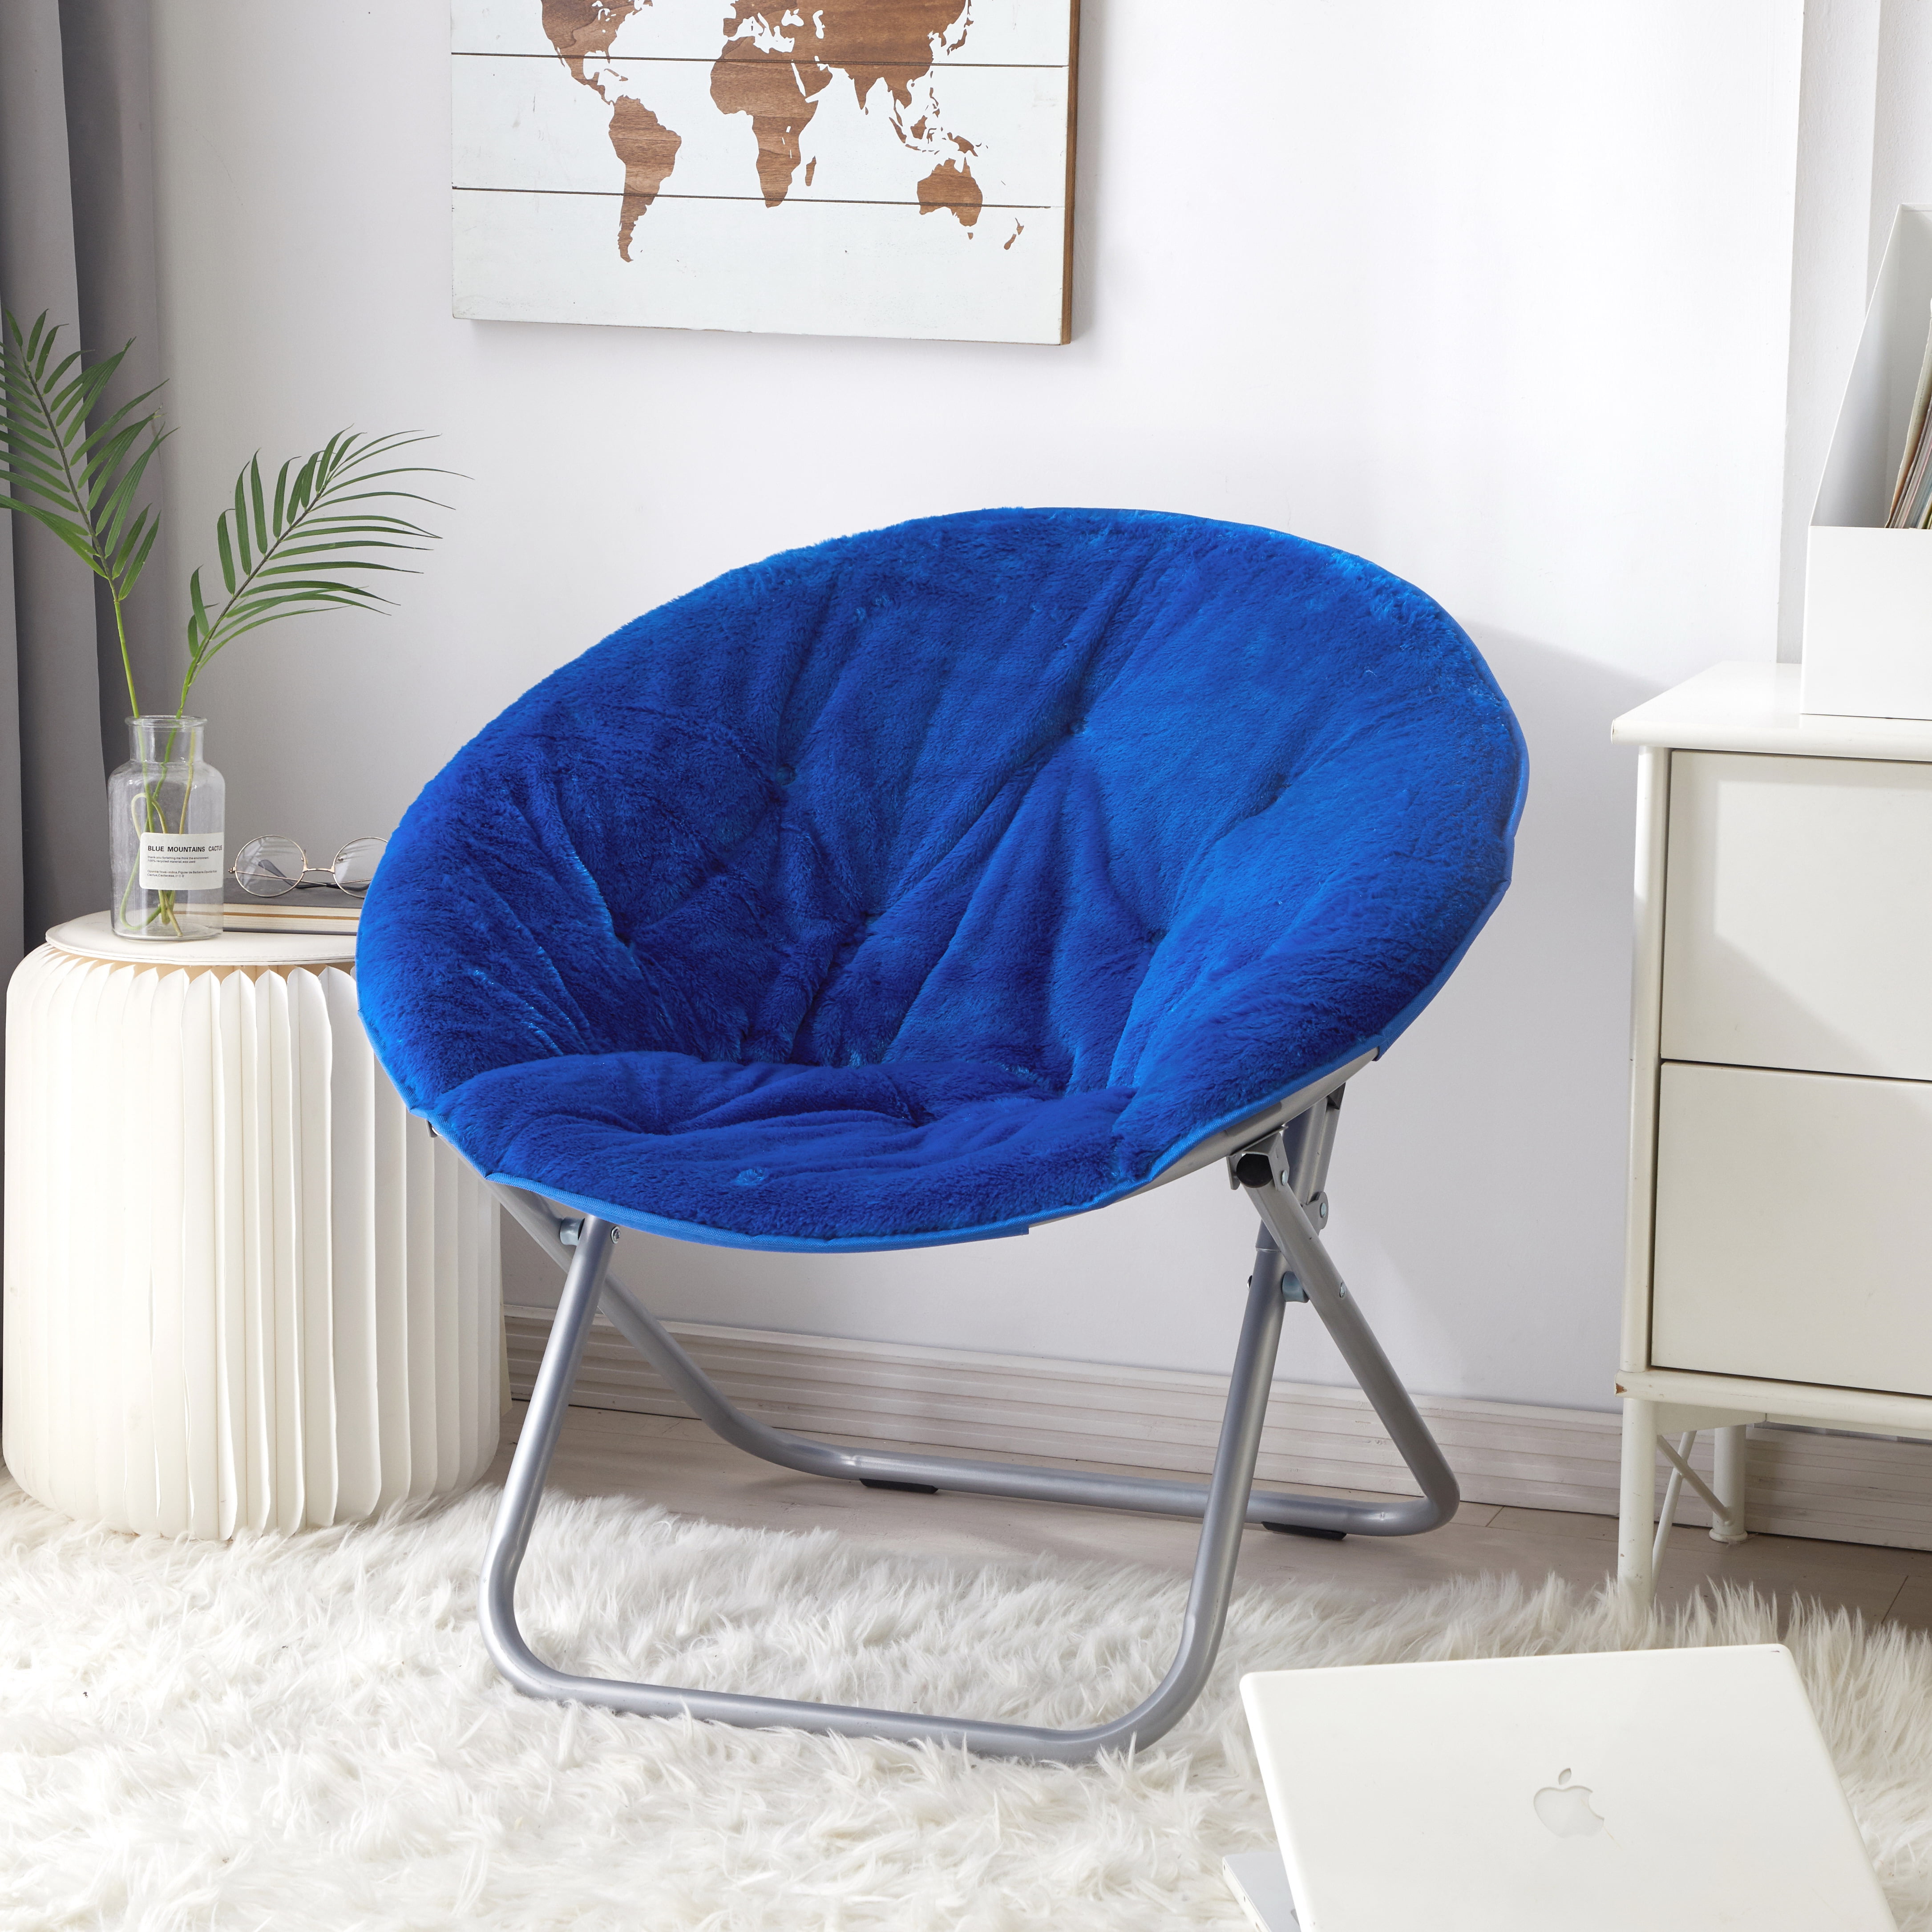 One Size Urban Shop Faux Fur Saucer Chair with Metal Frame Polyester Pillow Aqua Wind